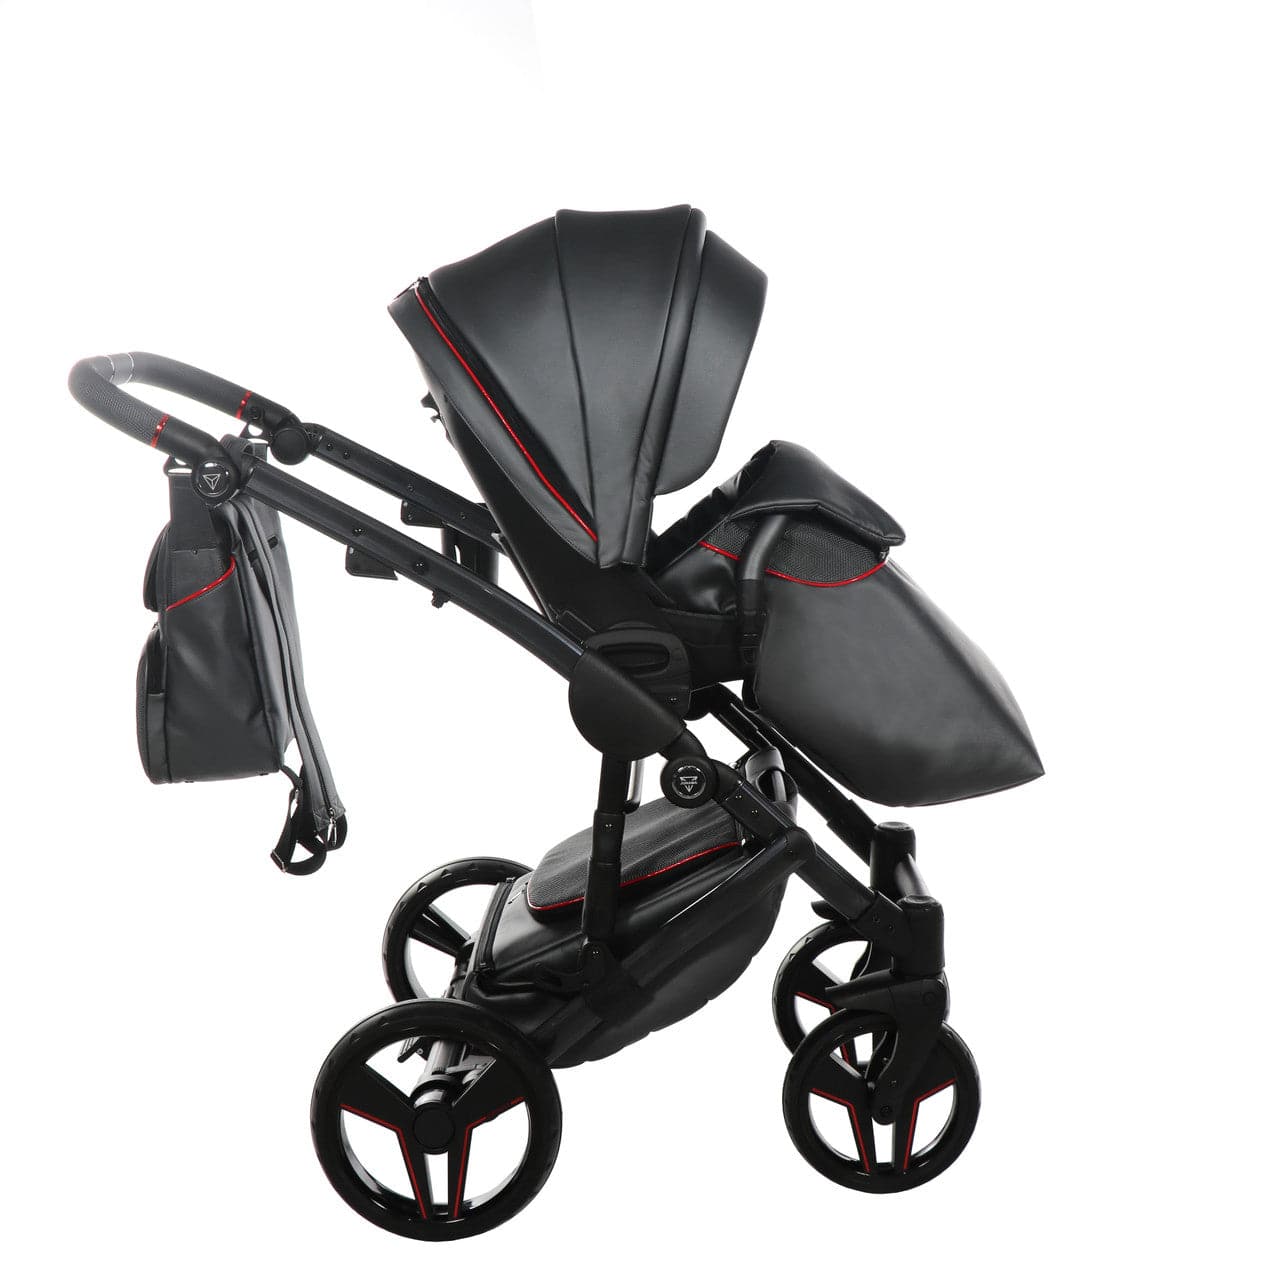 Junama S-Class 2 In 1 Pram - Graphite - For Your Little One